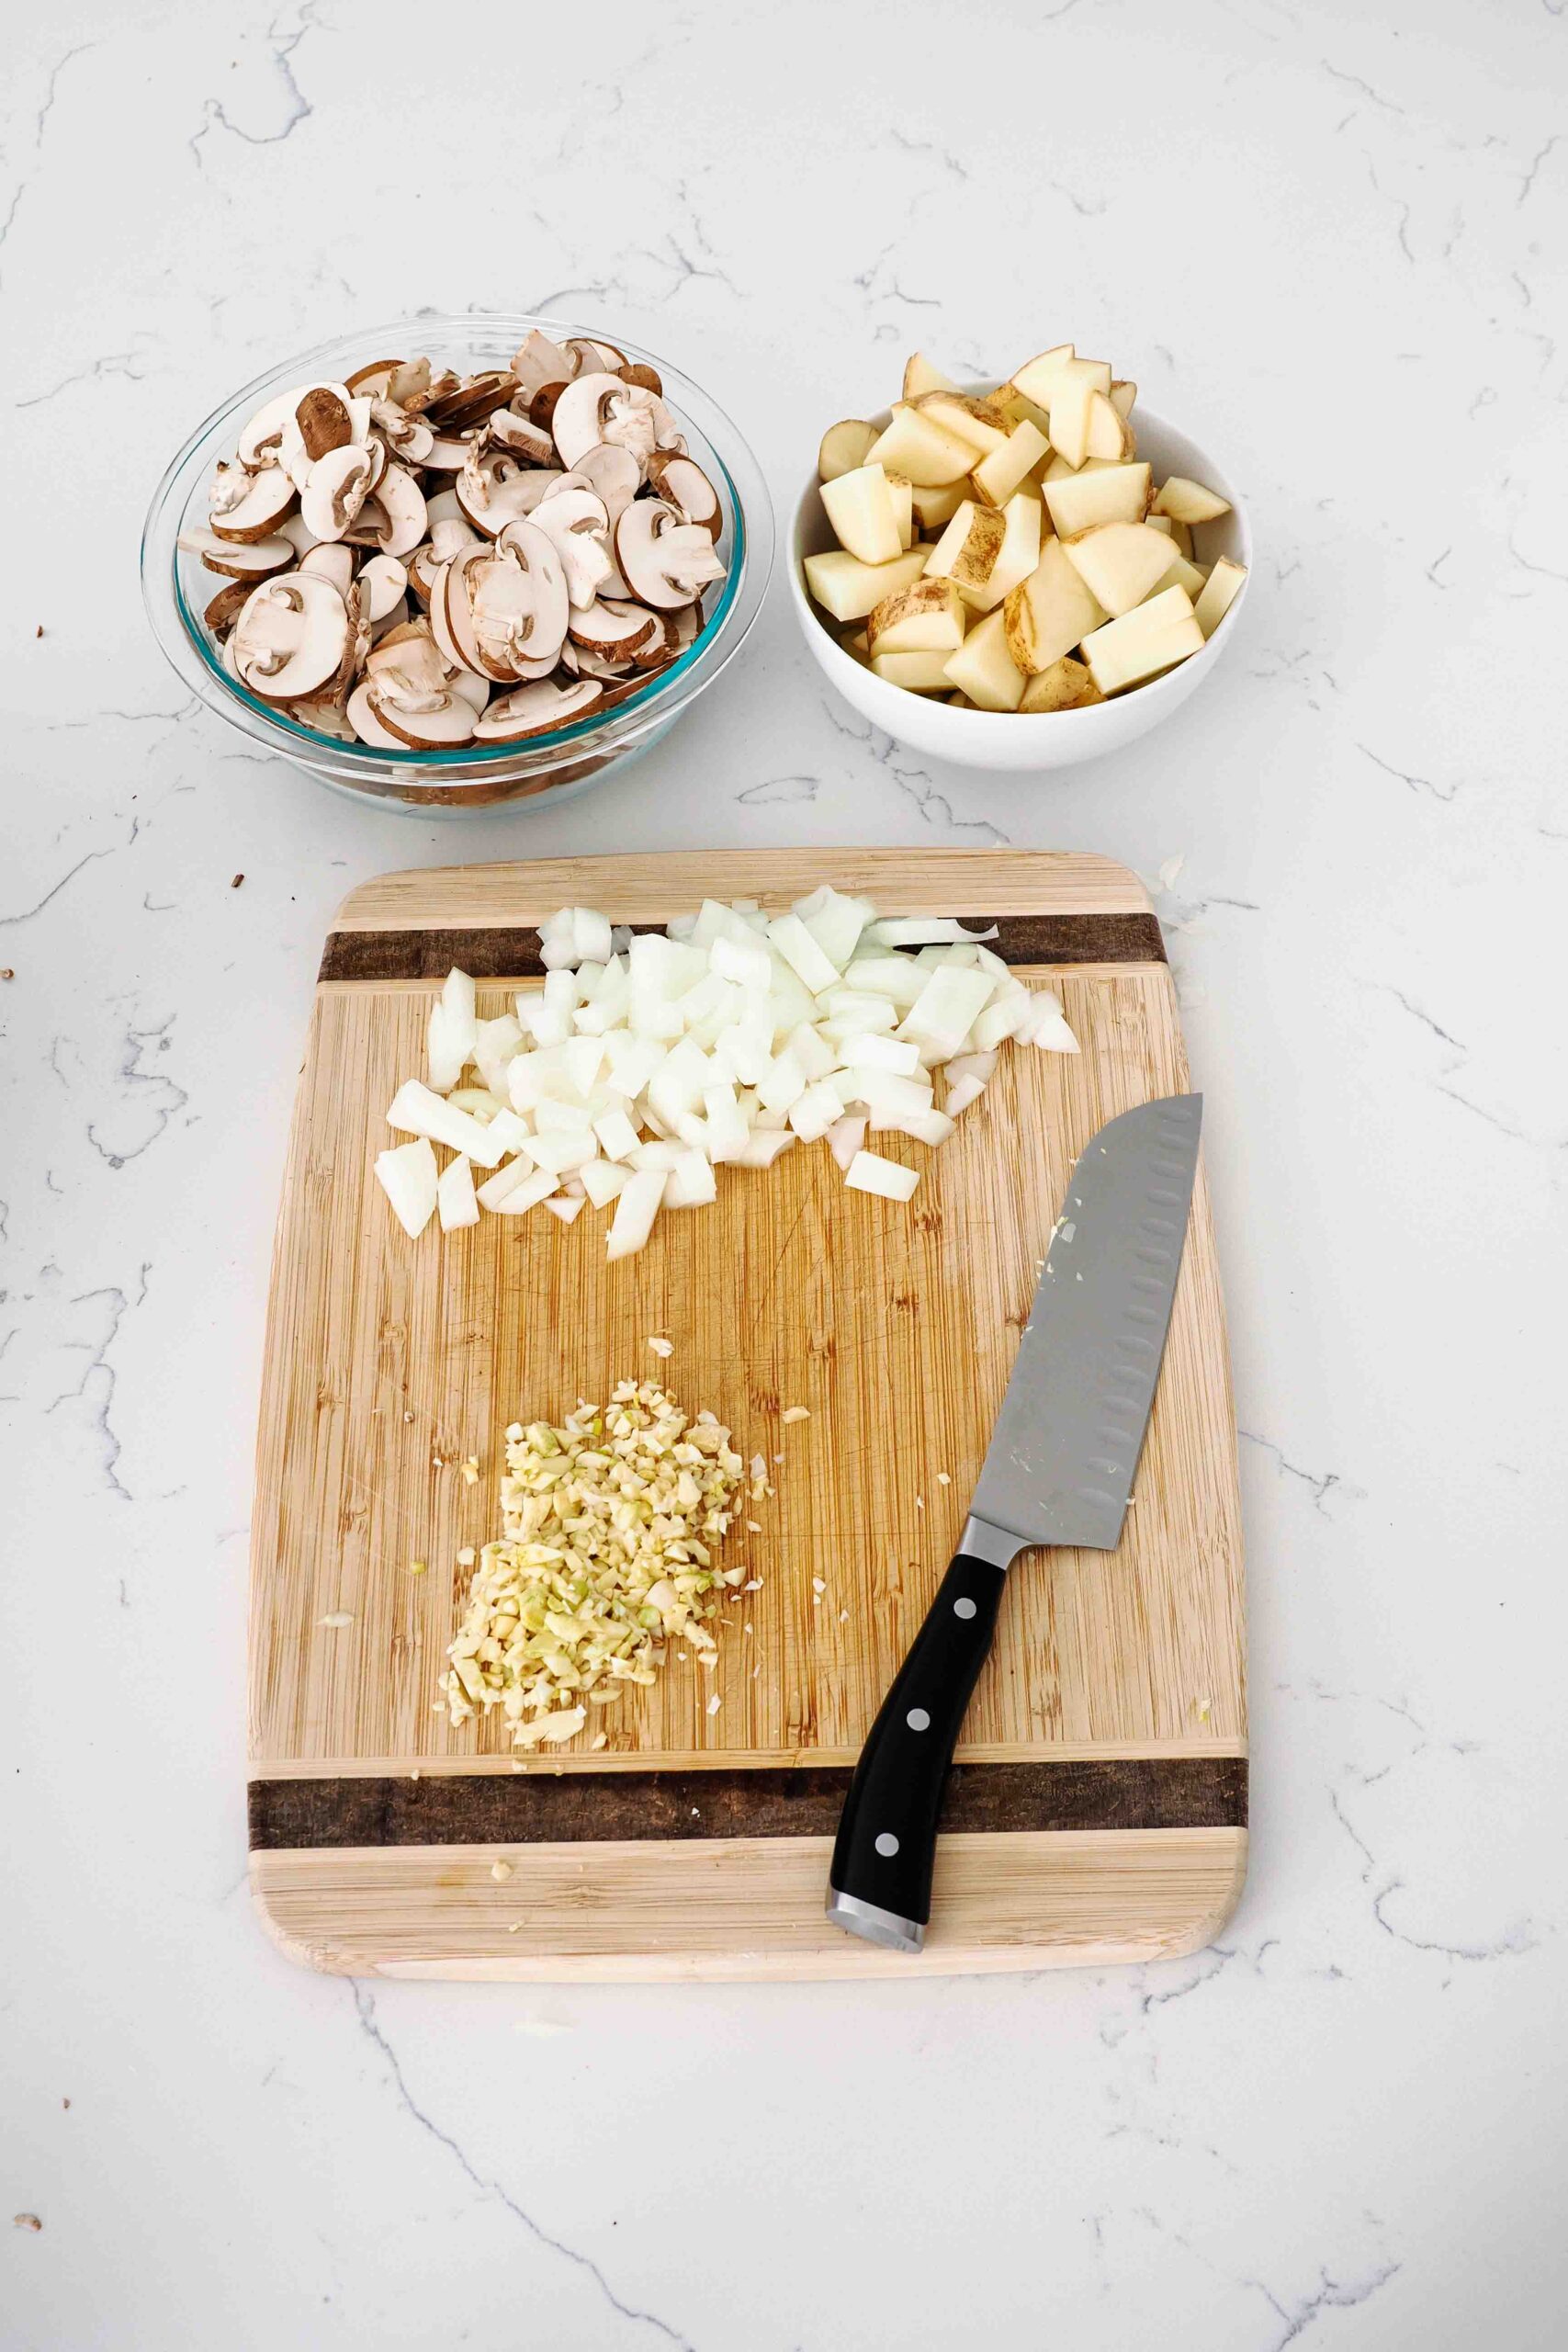 A cutting board and knife with chopped mushrooms, potatoes, onion, and garlic.